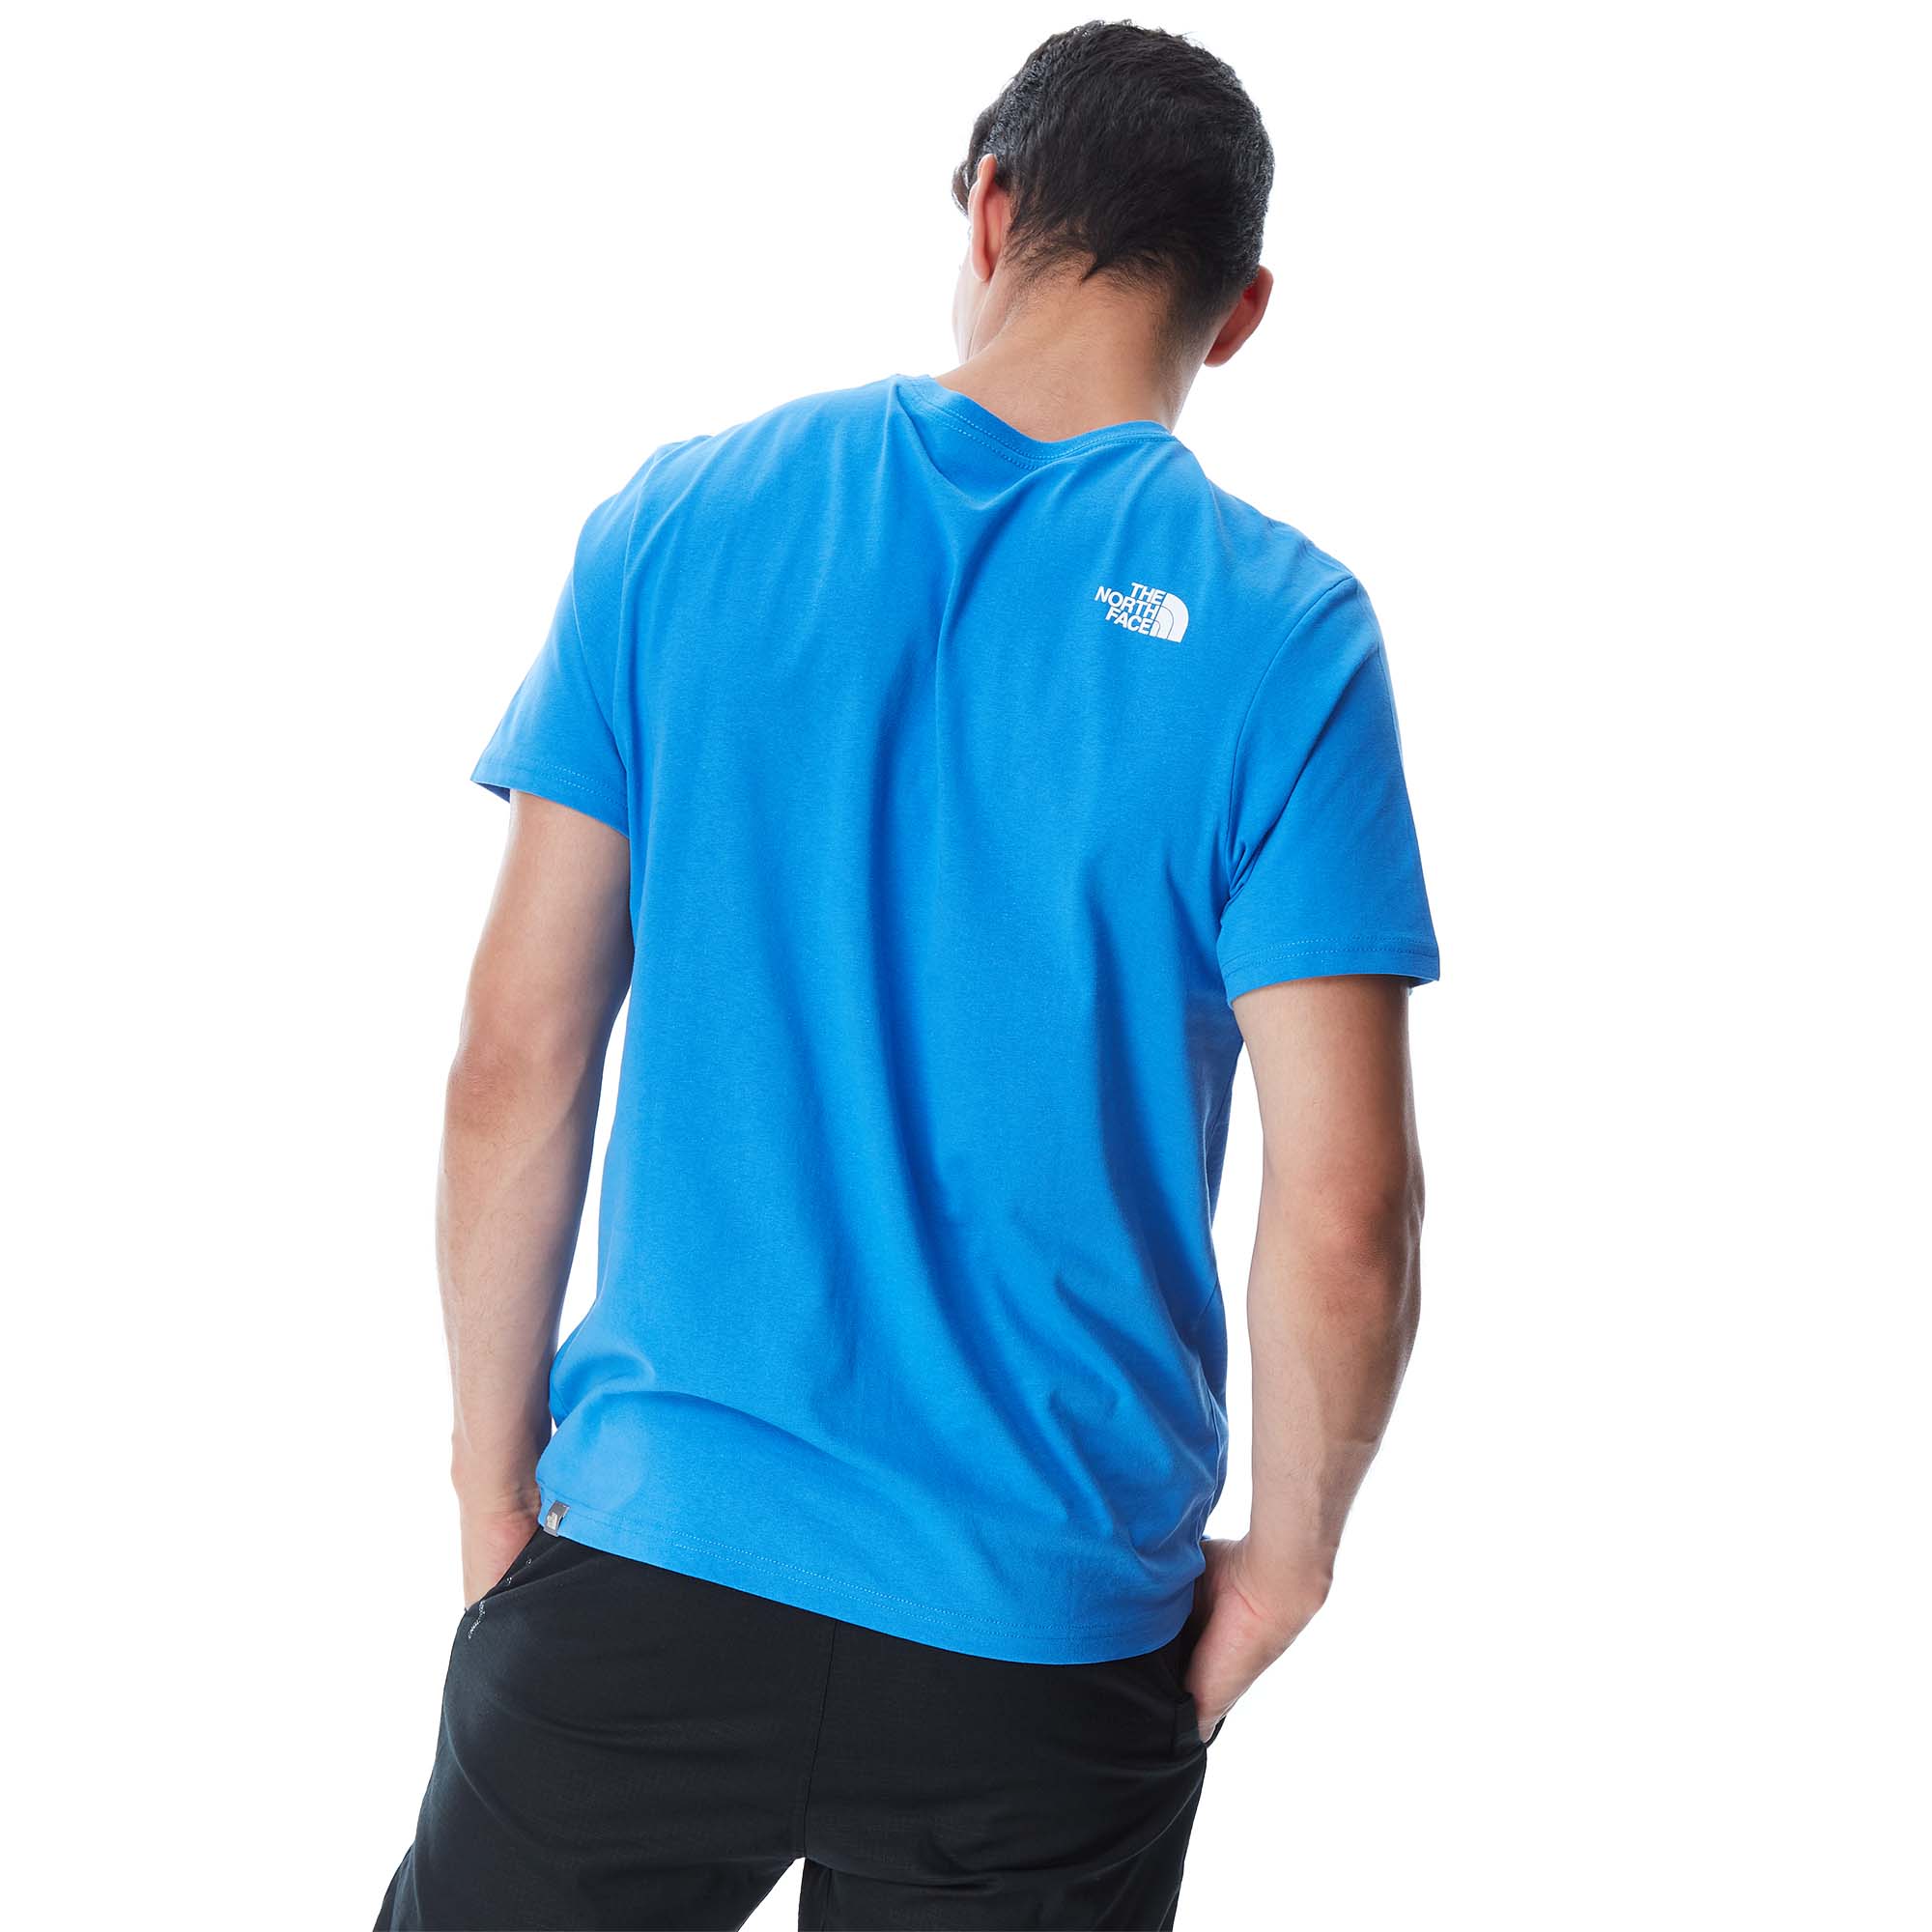 The North Face Woodcut Dome Short Sleeve T-shirt